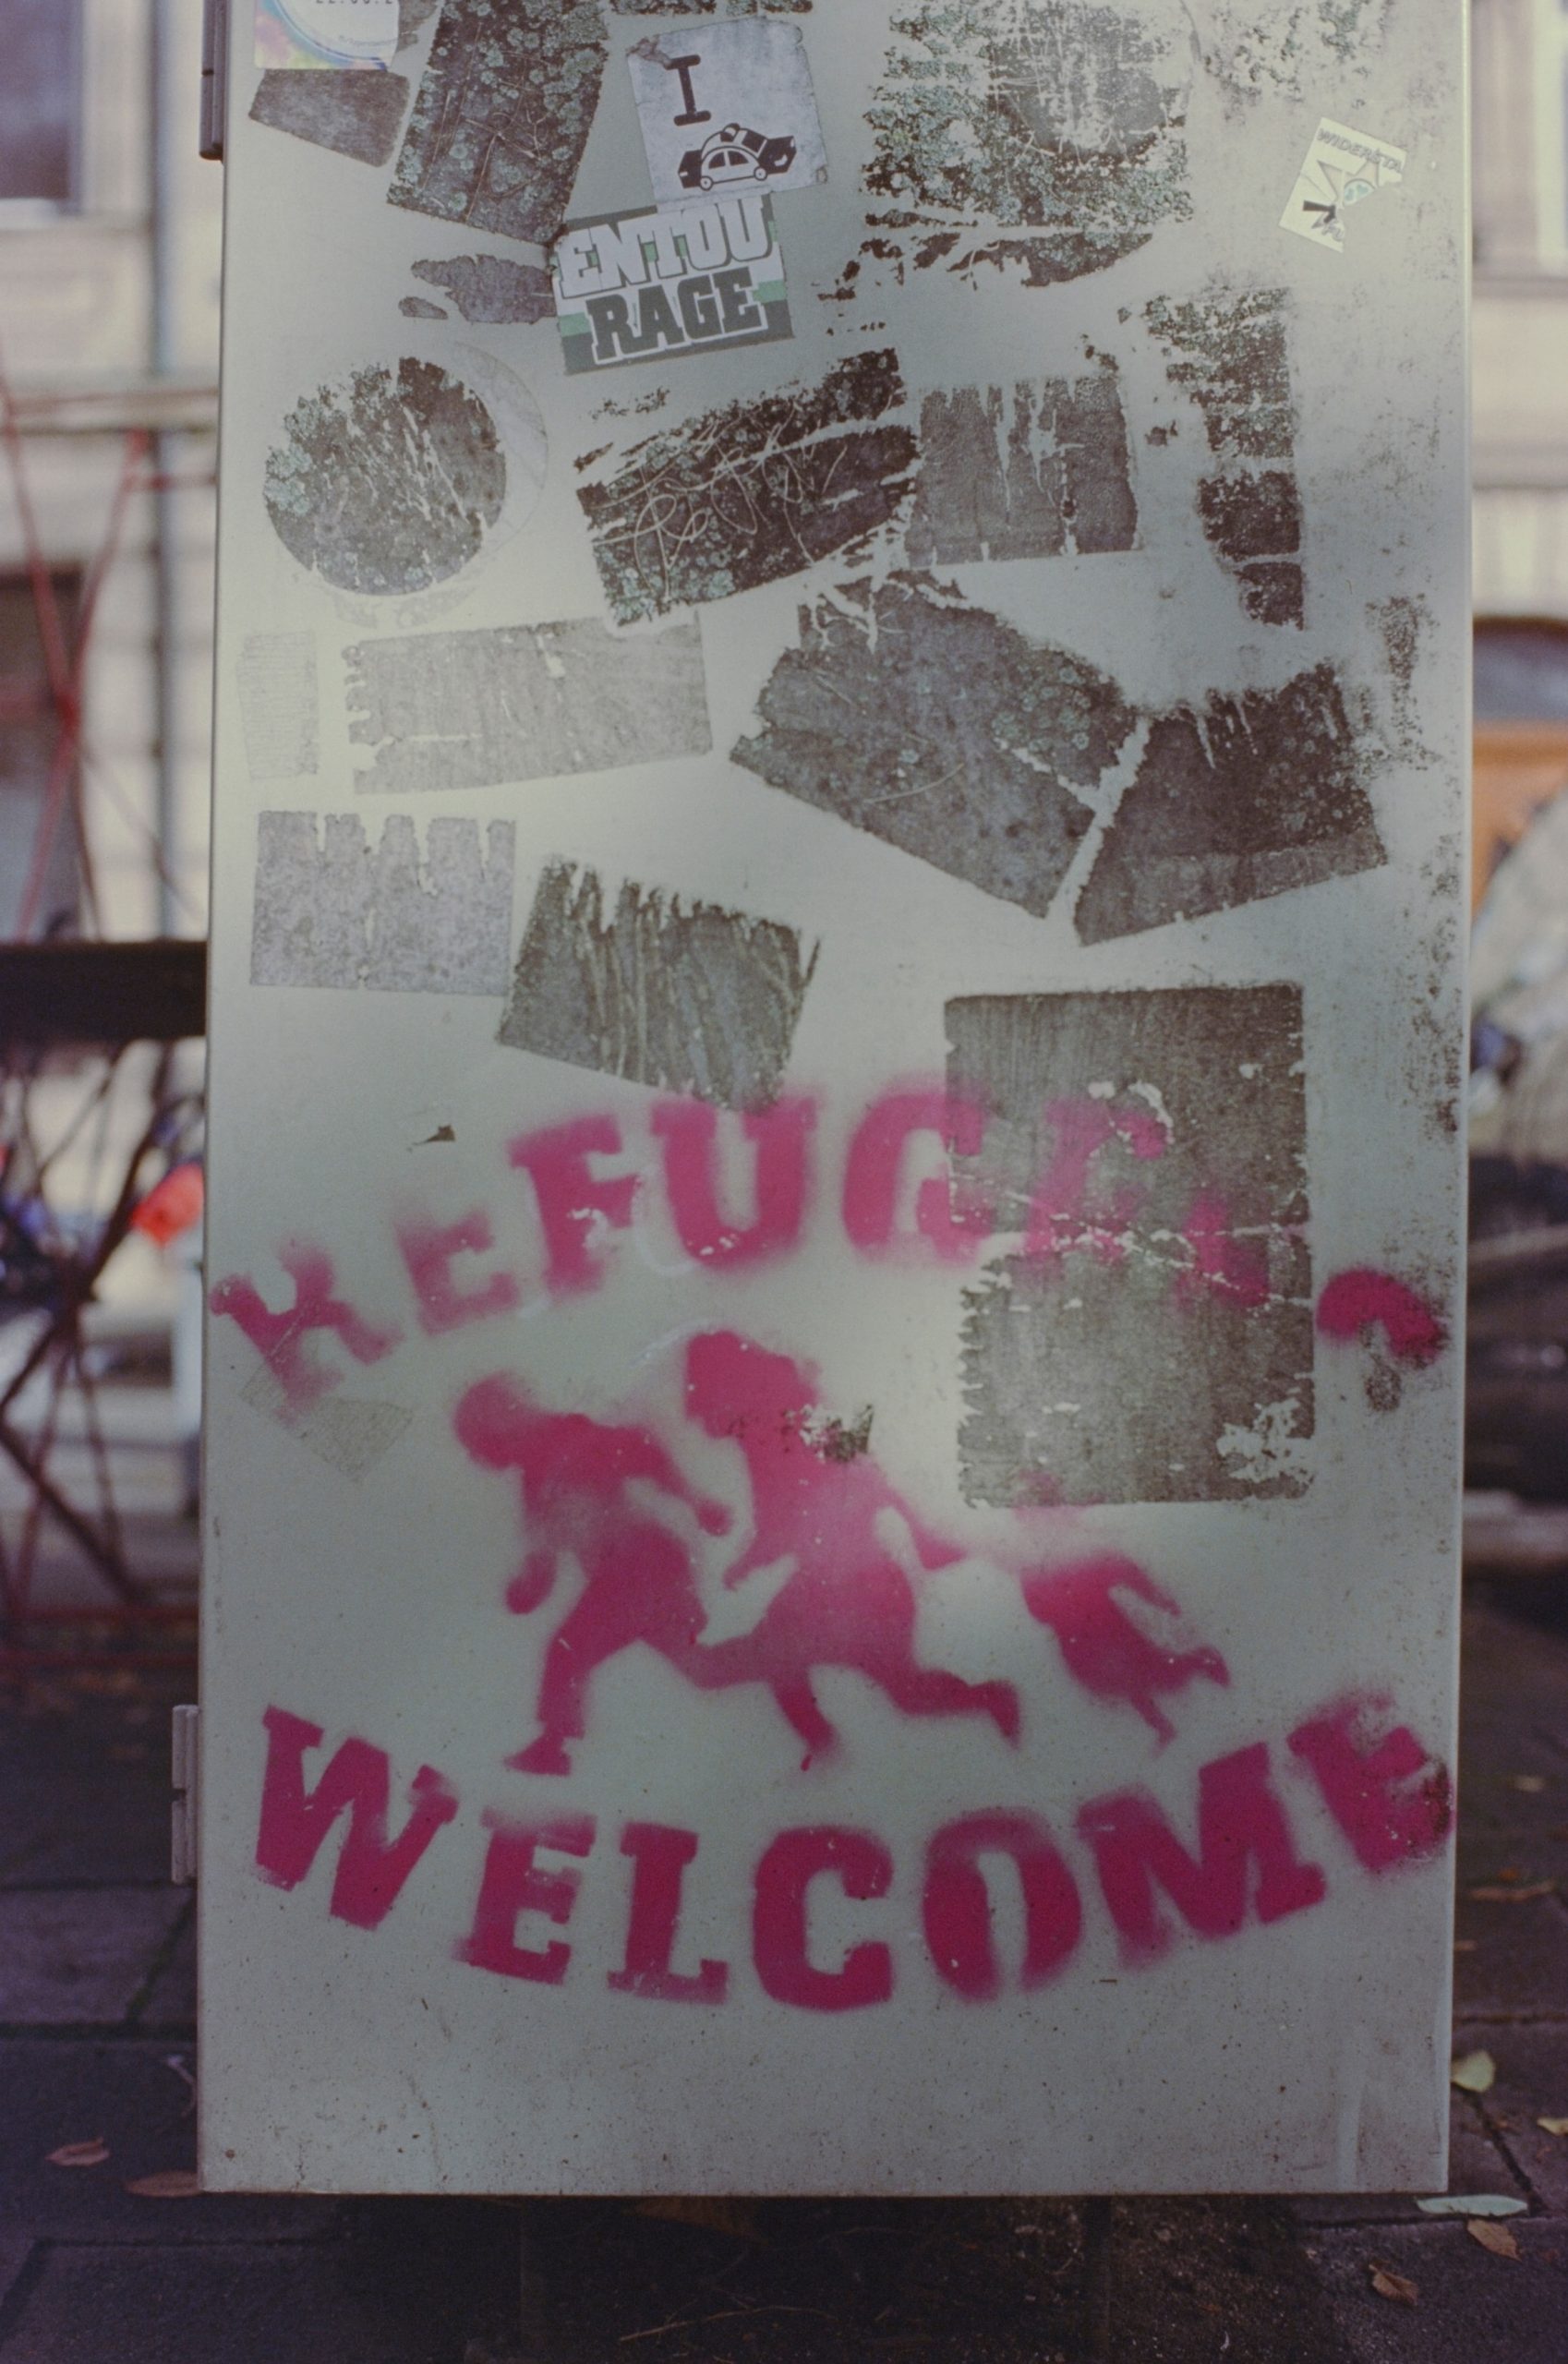 Graffiti reads "refugees welcome" in pink ink